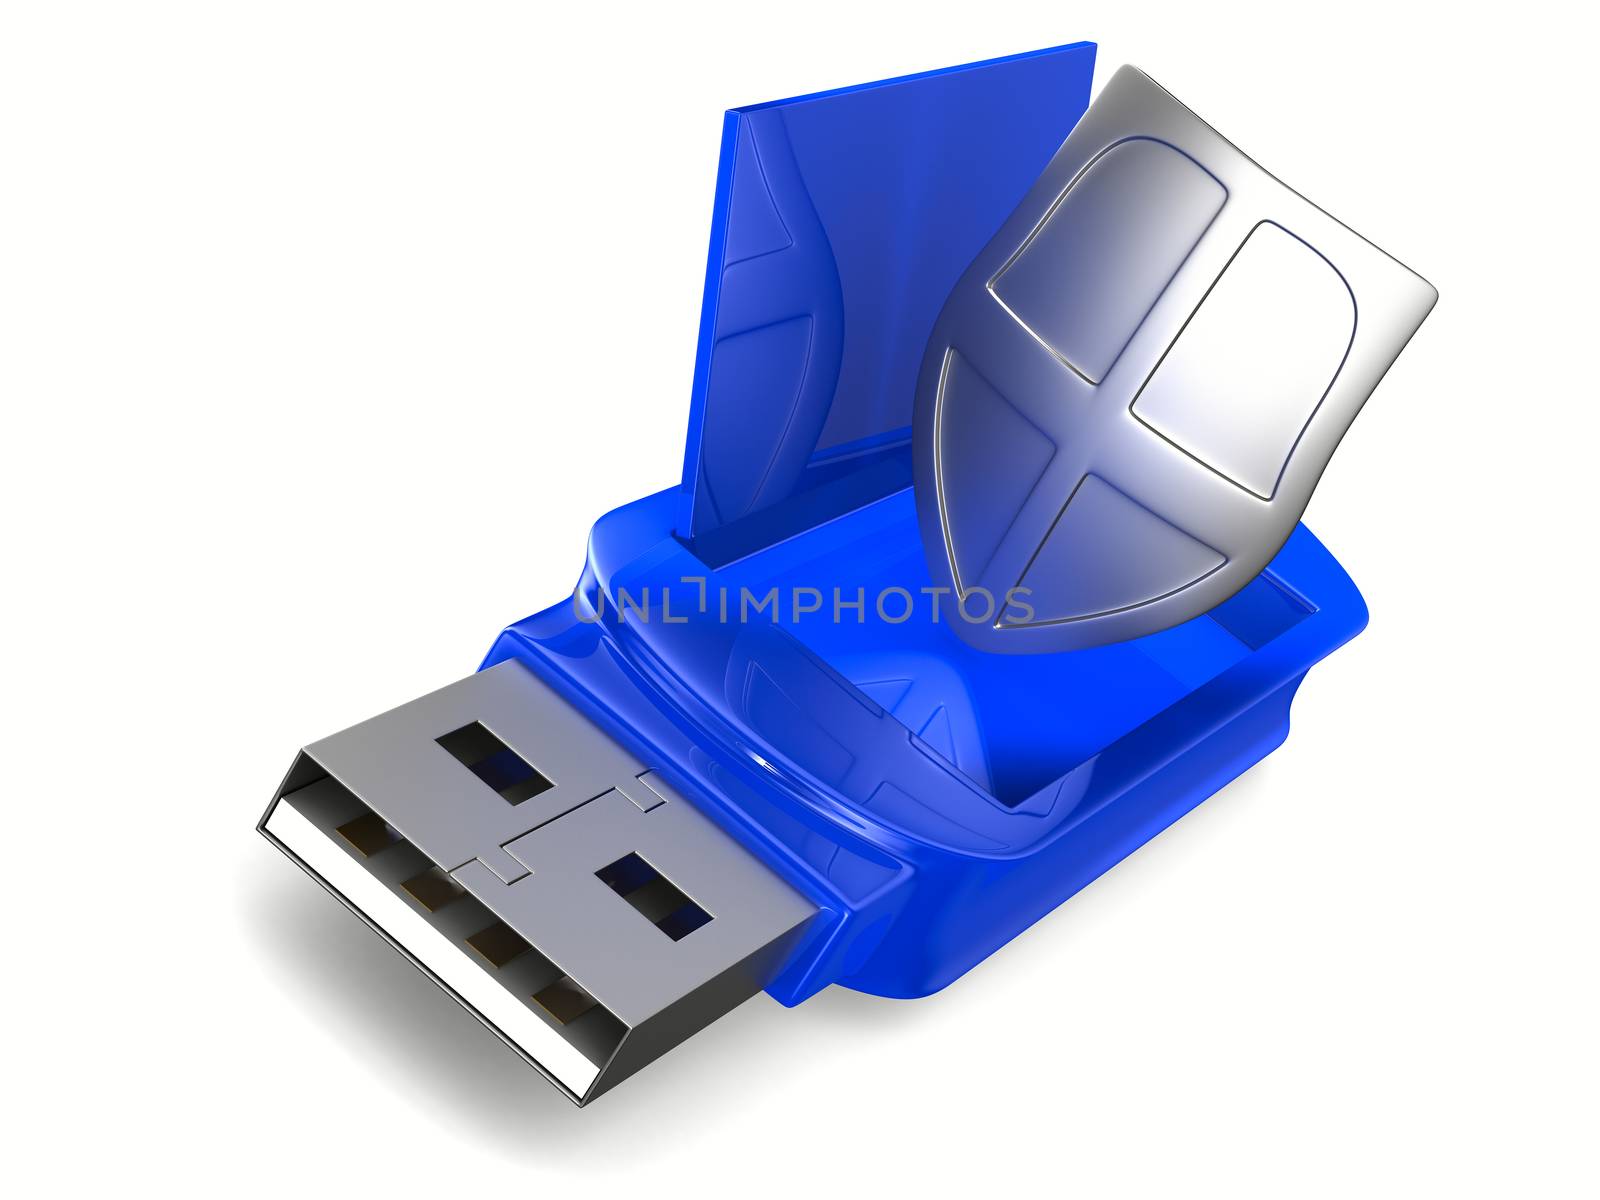 usb flash drive on white background. Isolated 3D image